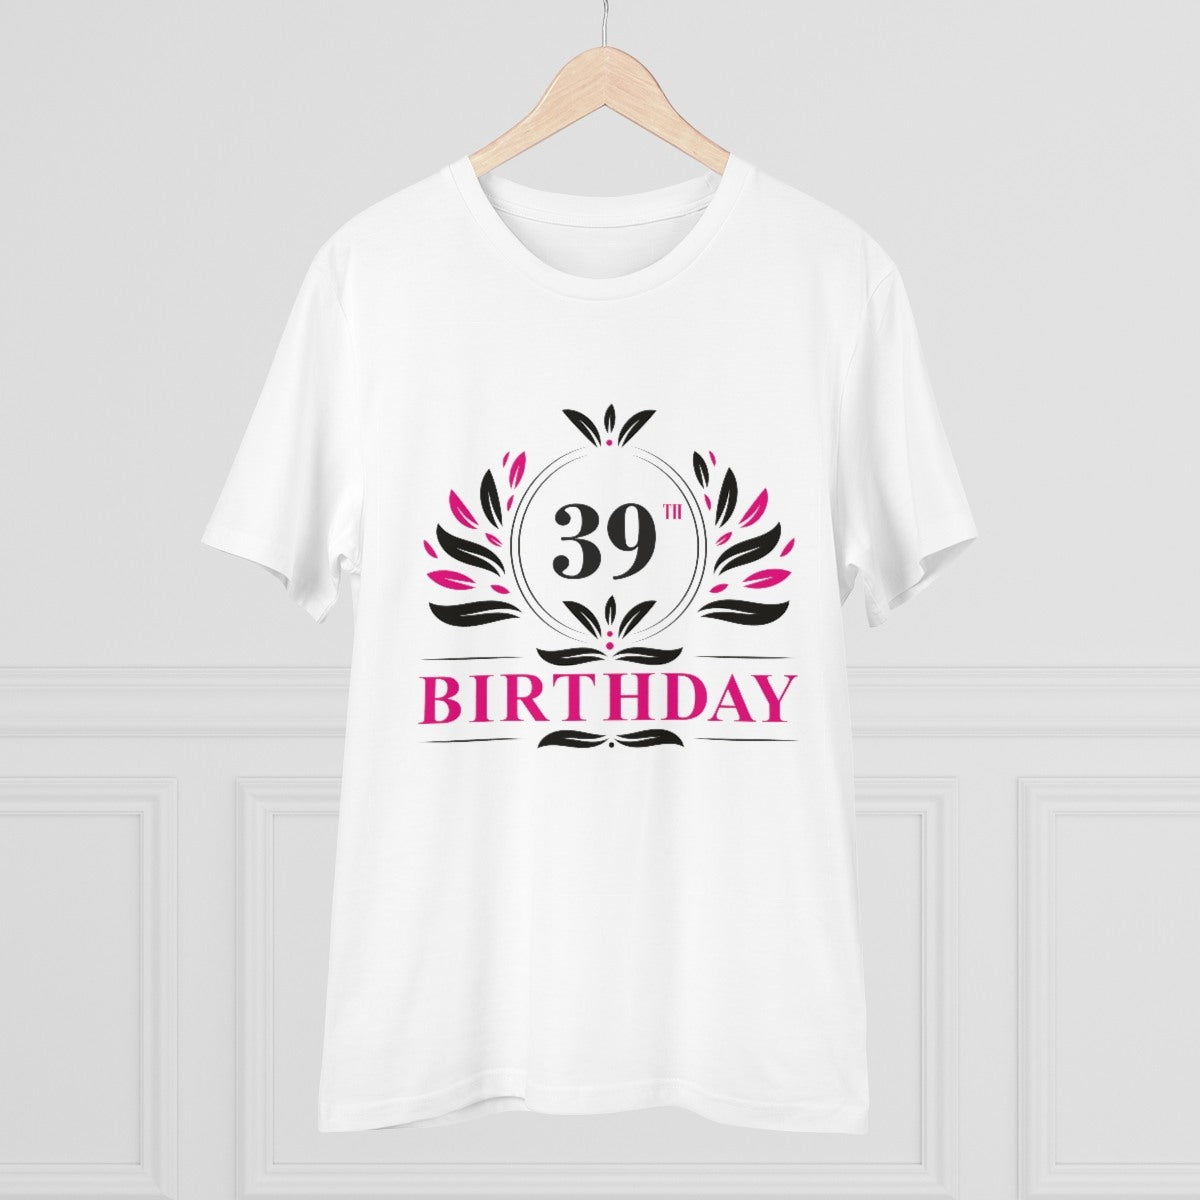 Men's PC Cotton 39th Birthday Printed T Shirt (Color: White, Thread Count: 180GSM) - GillKart